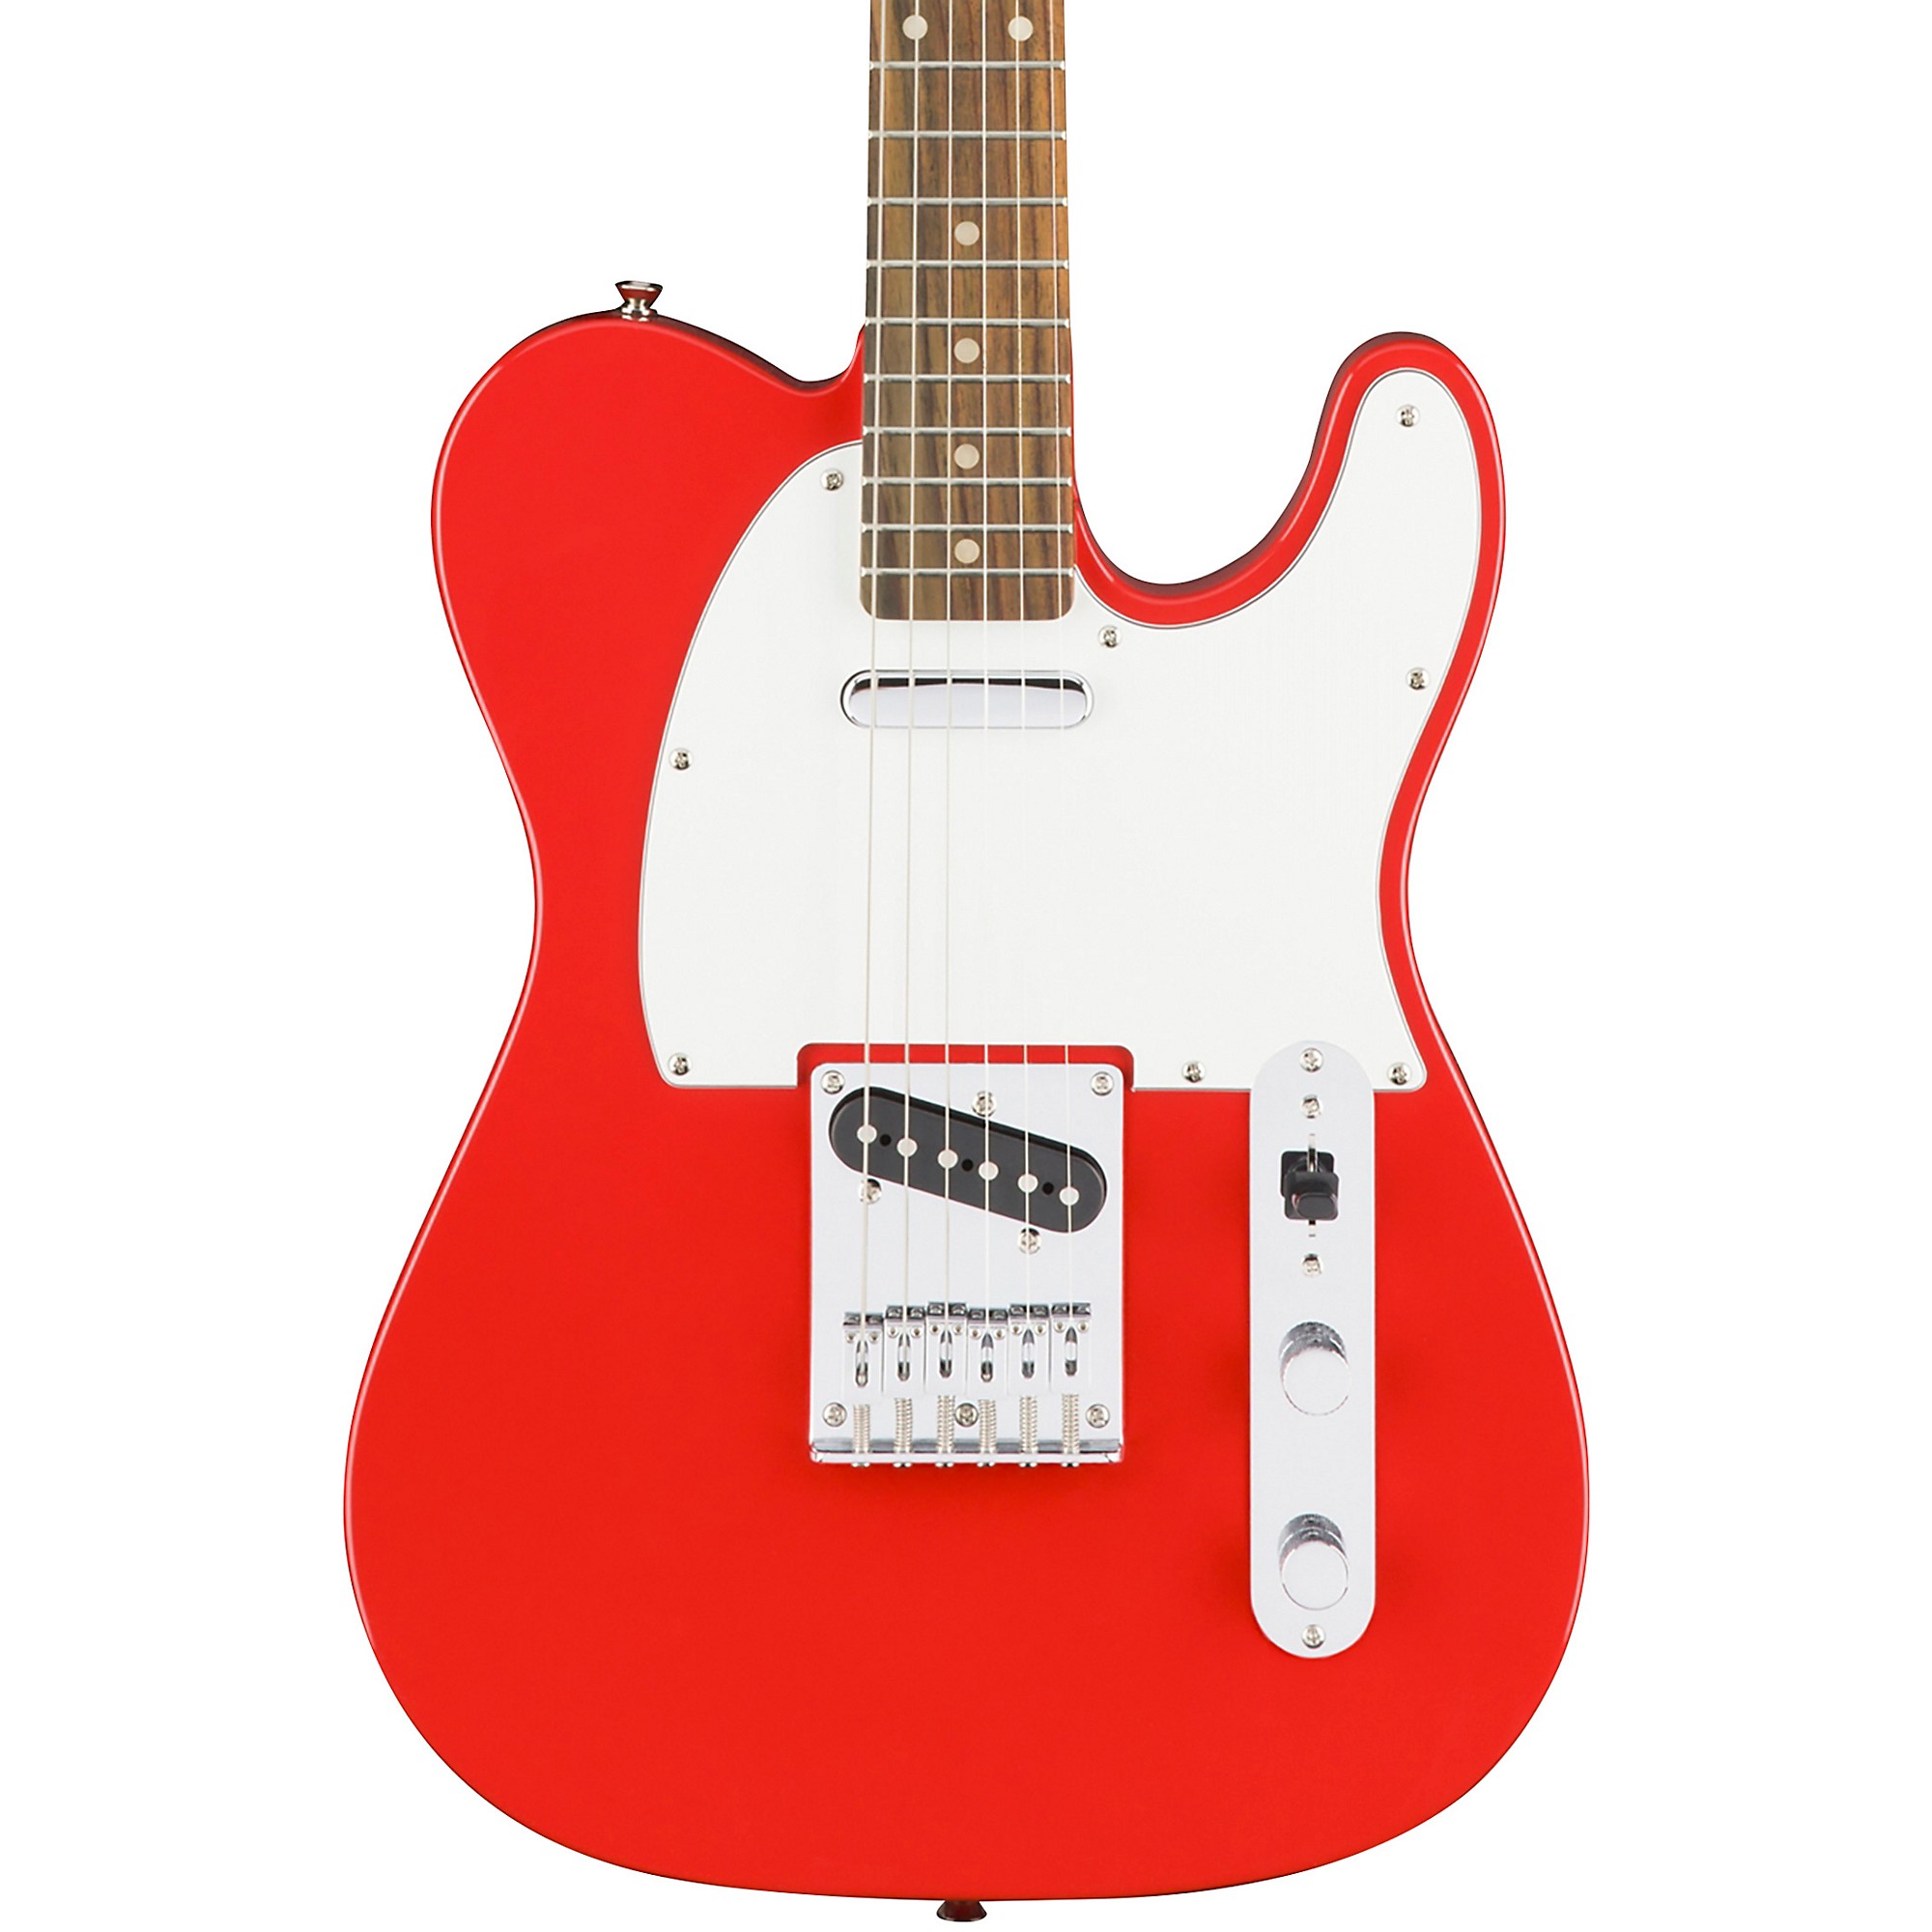 Squier Affinity Telecaster Electric Guitar Race Red | Guitar Center